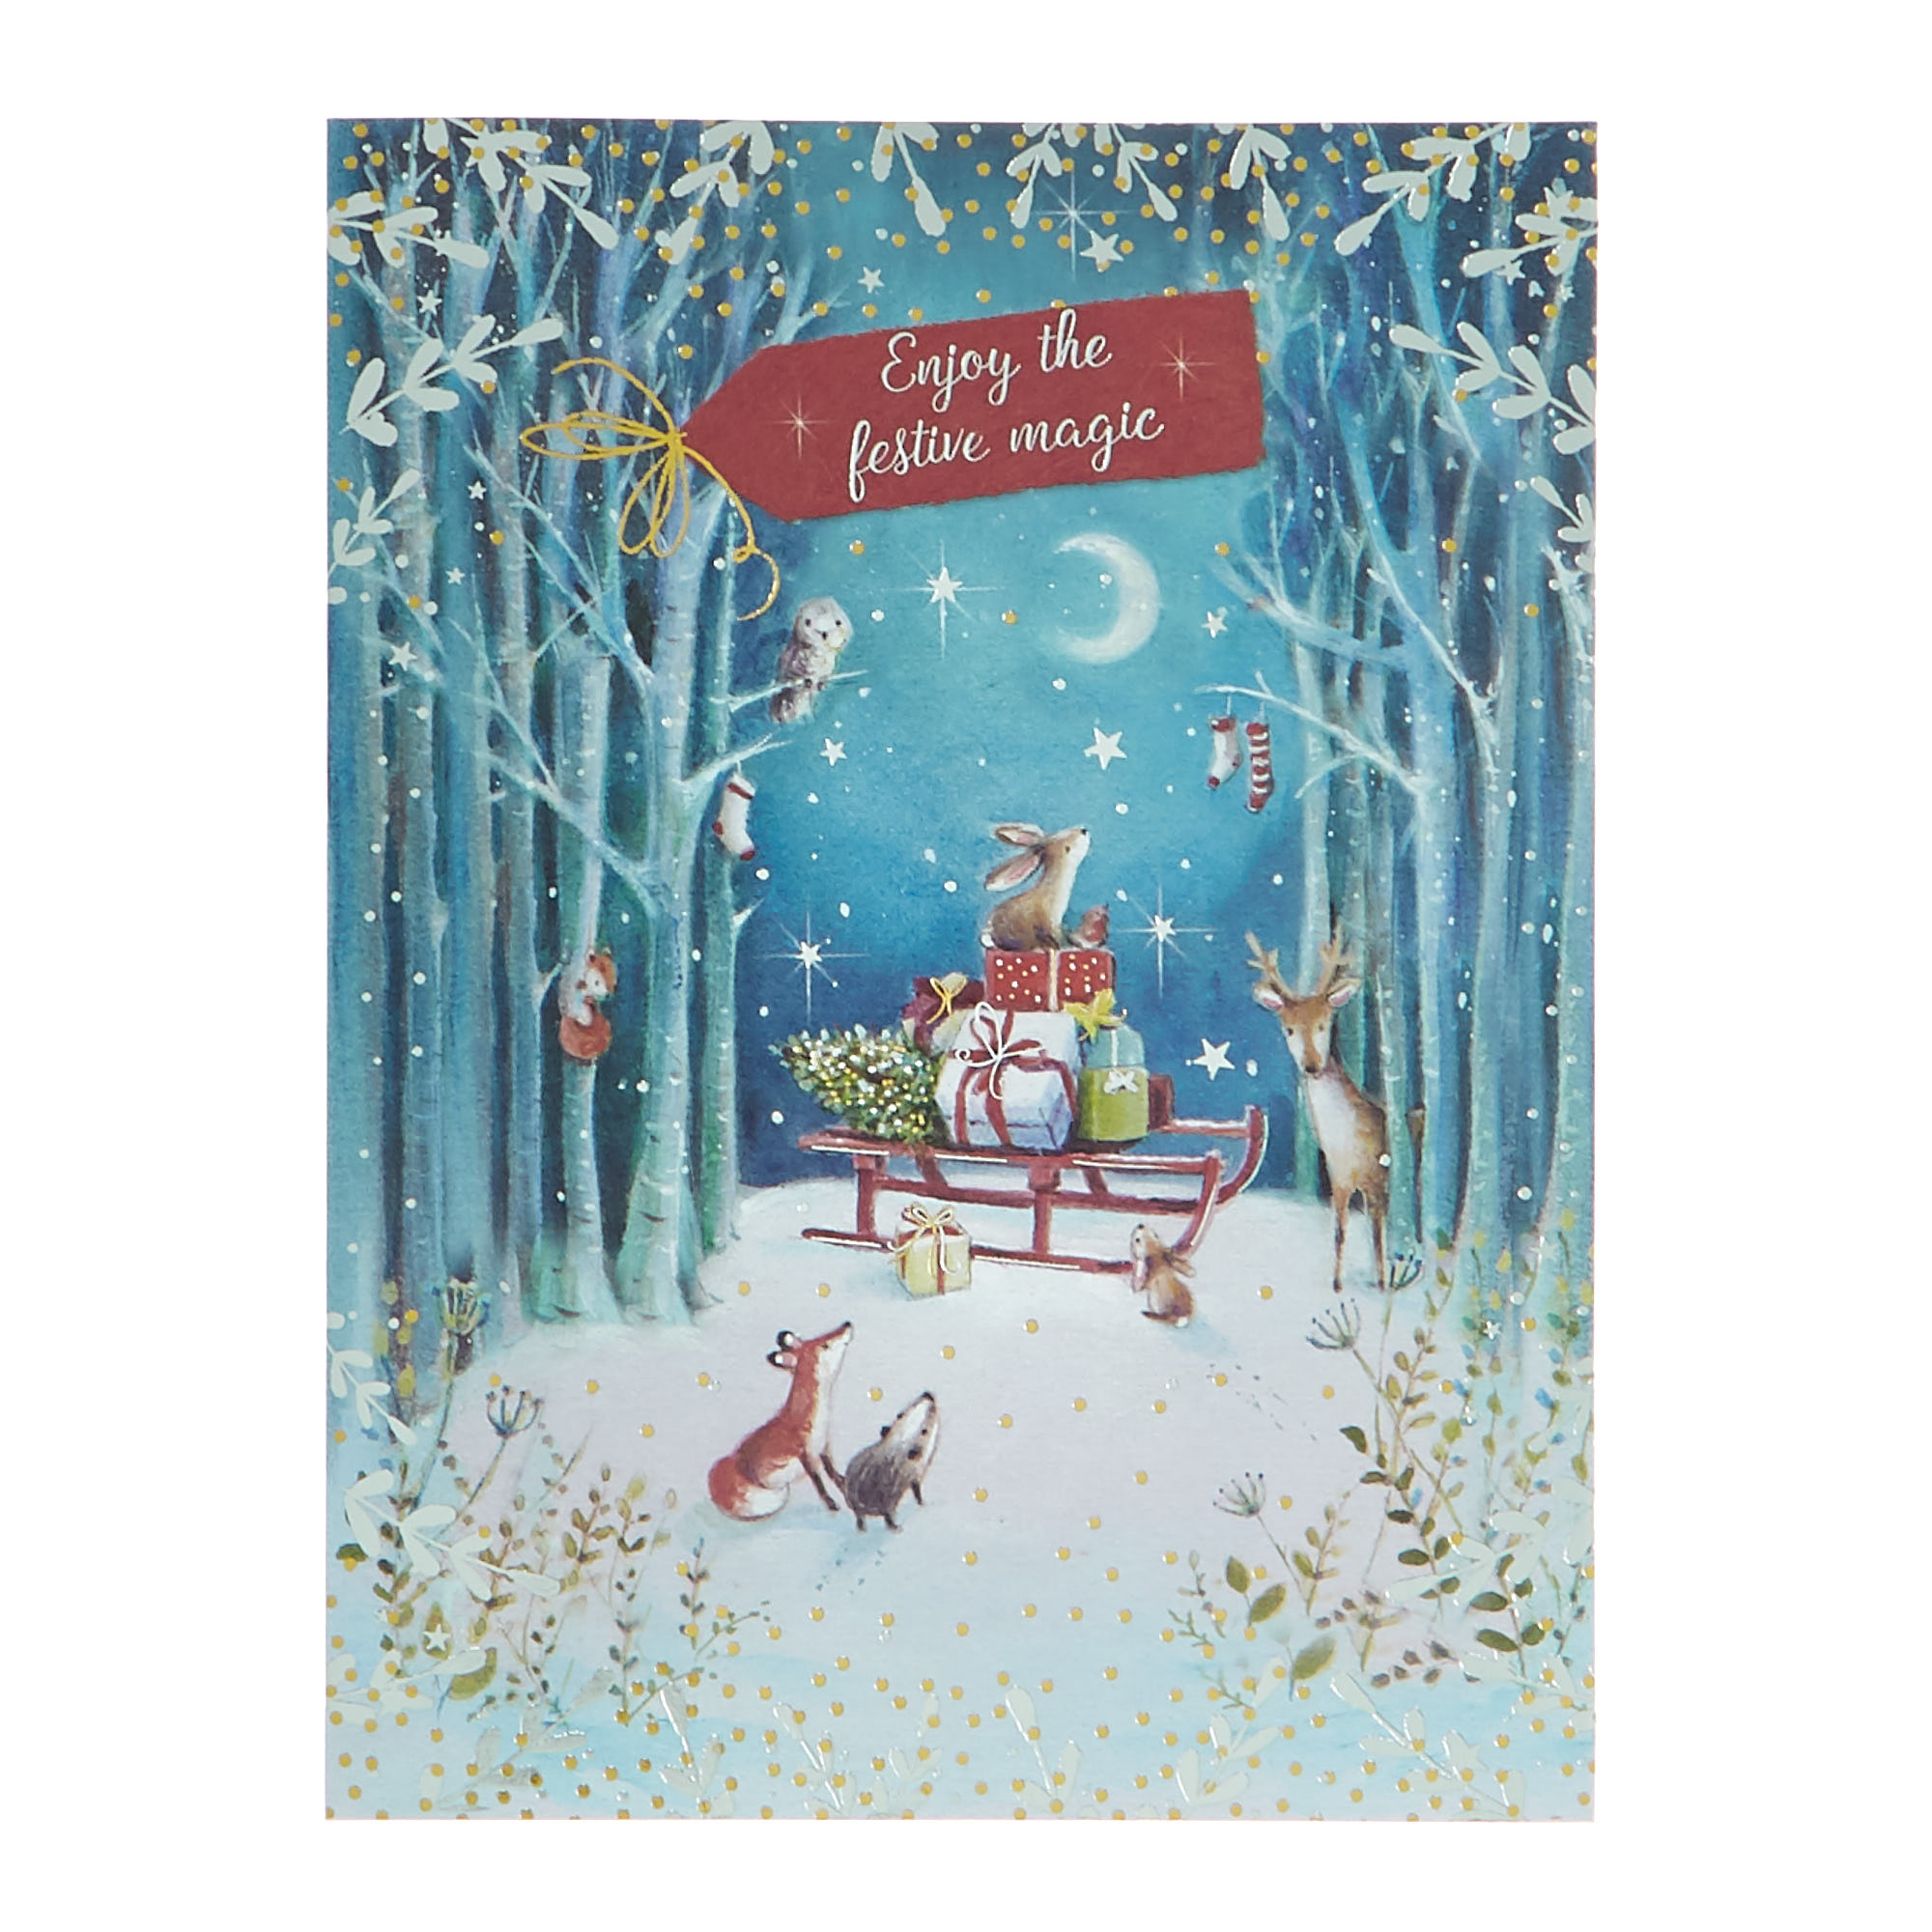 10 Deluxe Charity Boxed Christmas Cards - Festive Woodland (2 Designs)